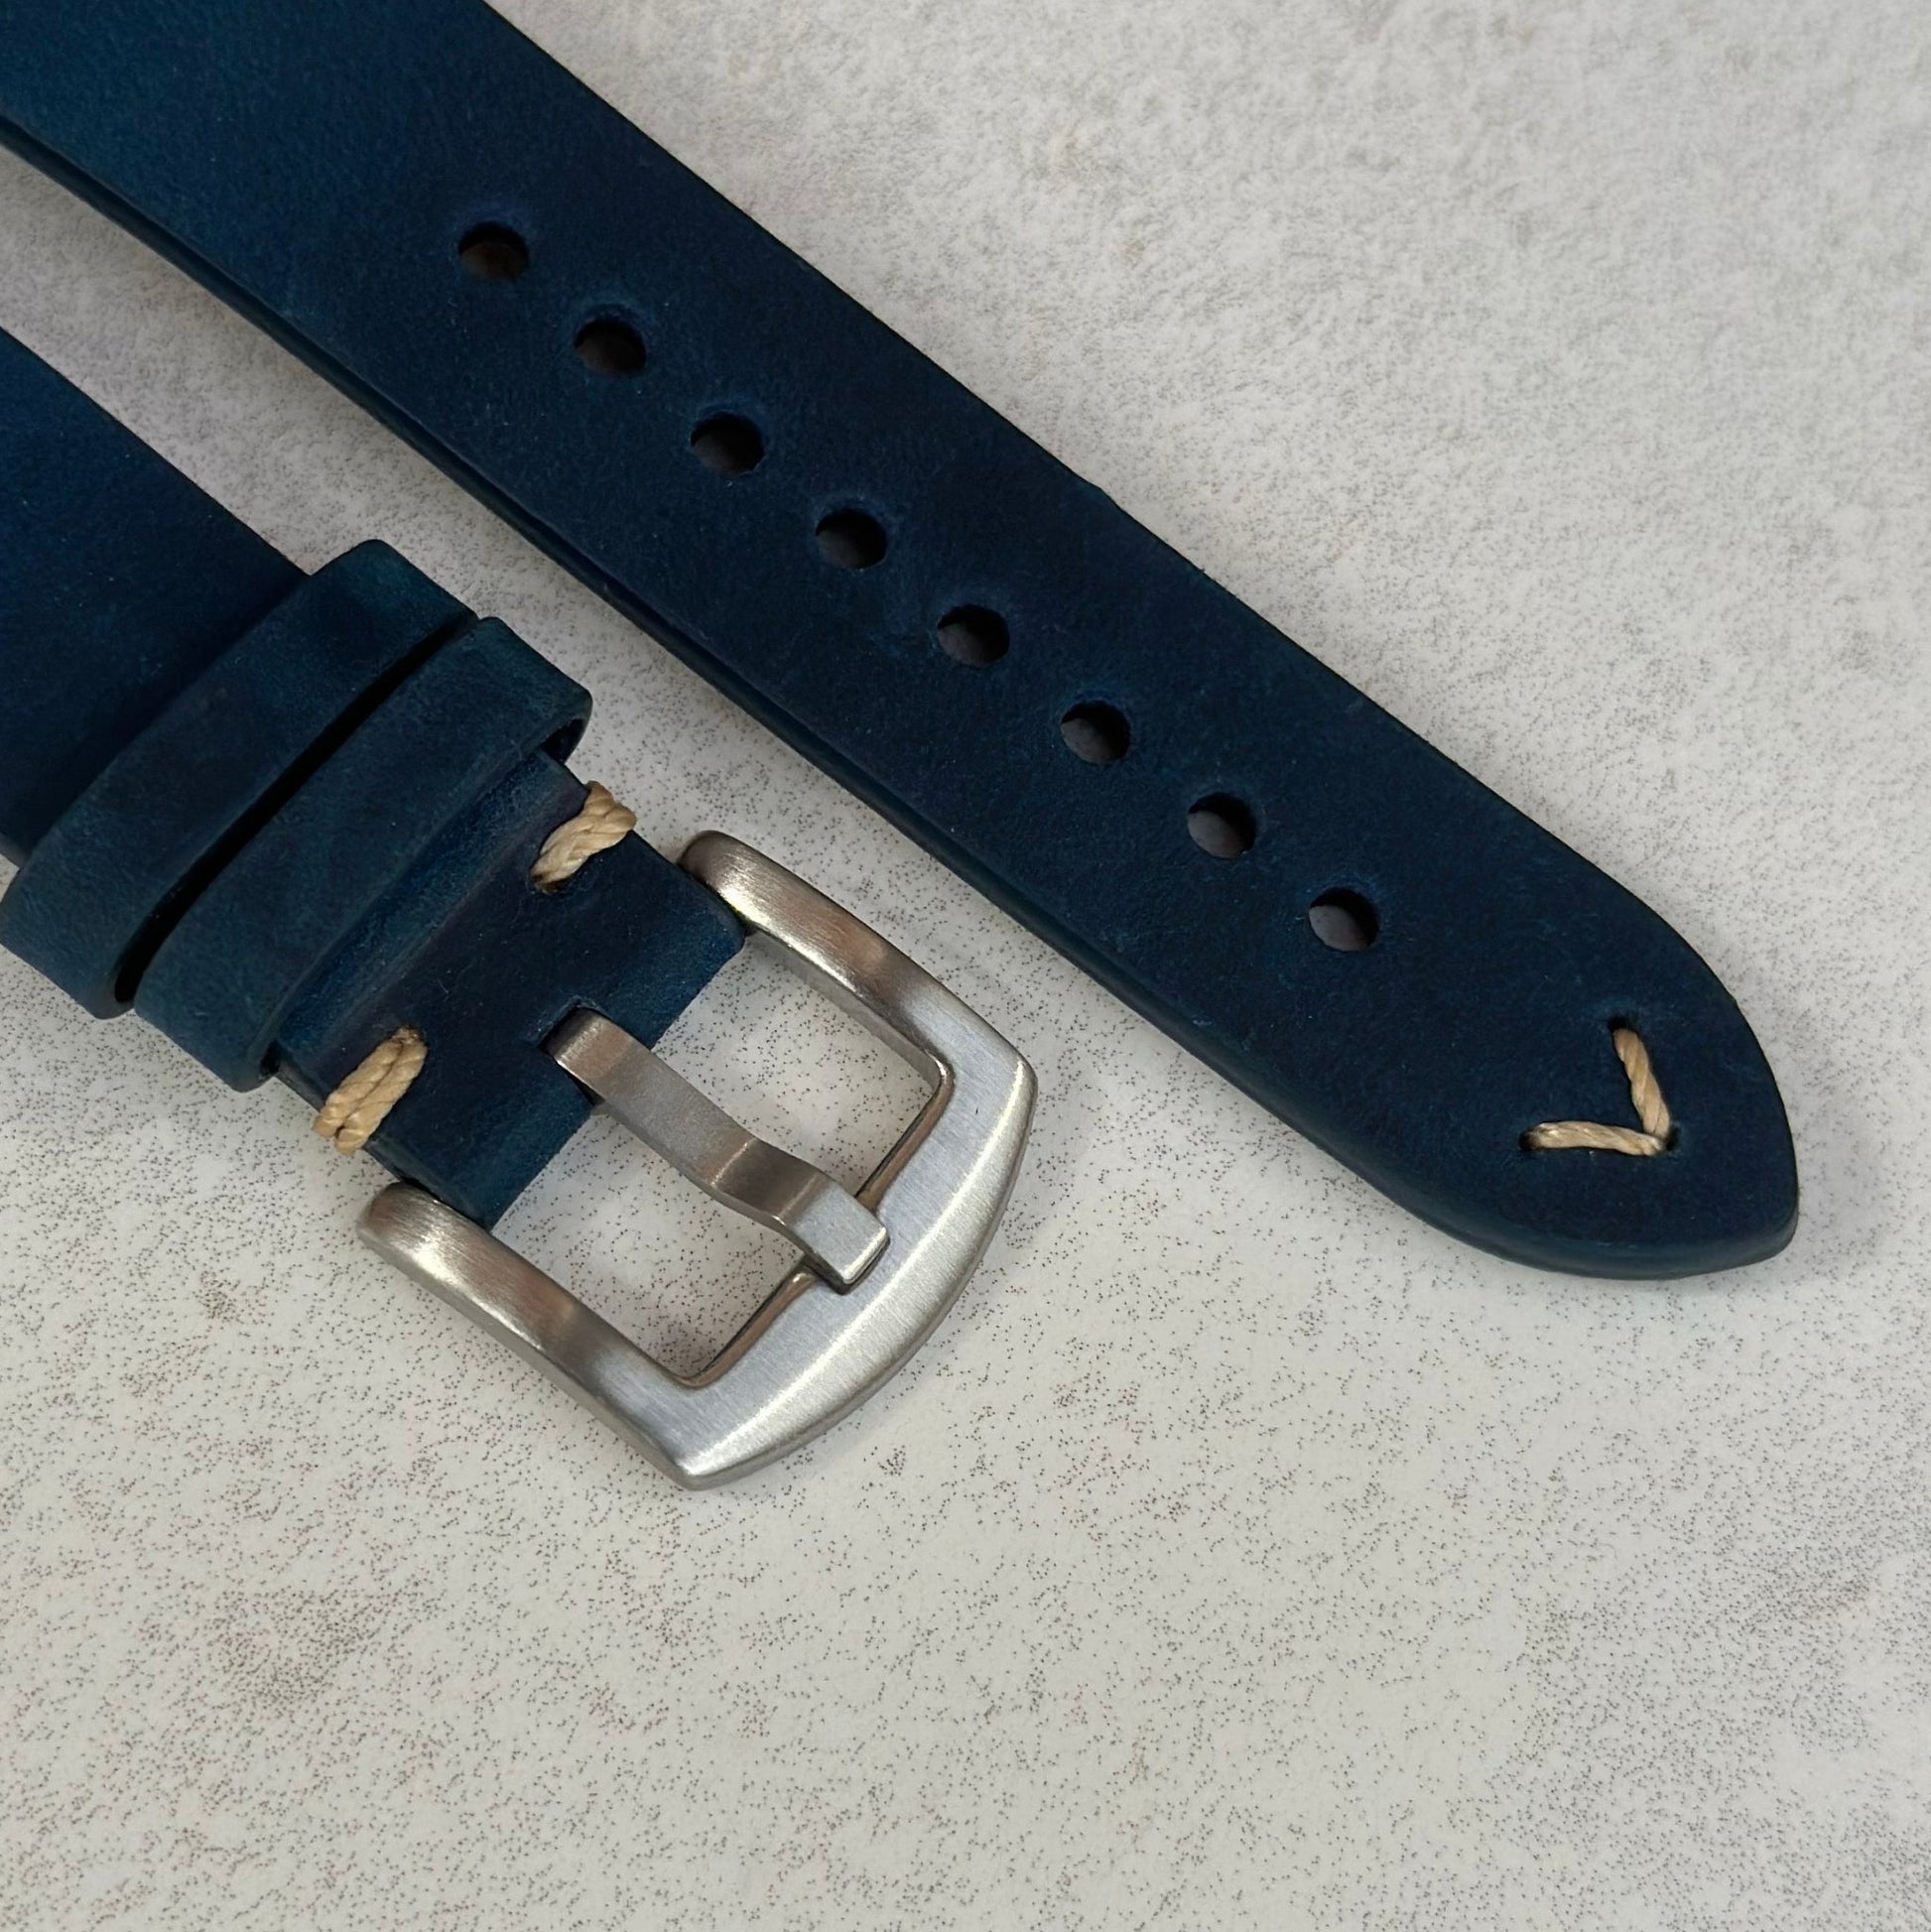 Brushed 316L stainless steel buckle on the Madrid midnight blue full grain leather watch strap. Watch And Strap.